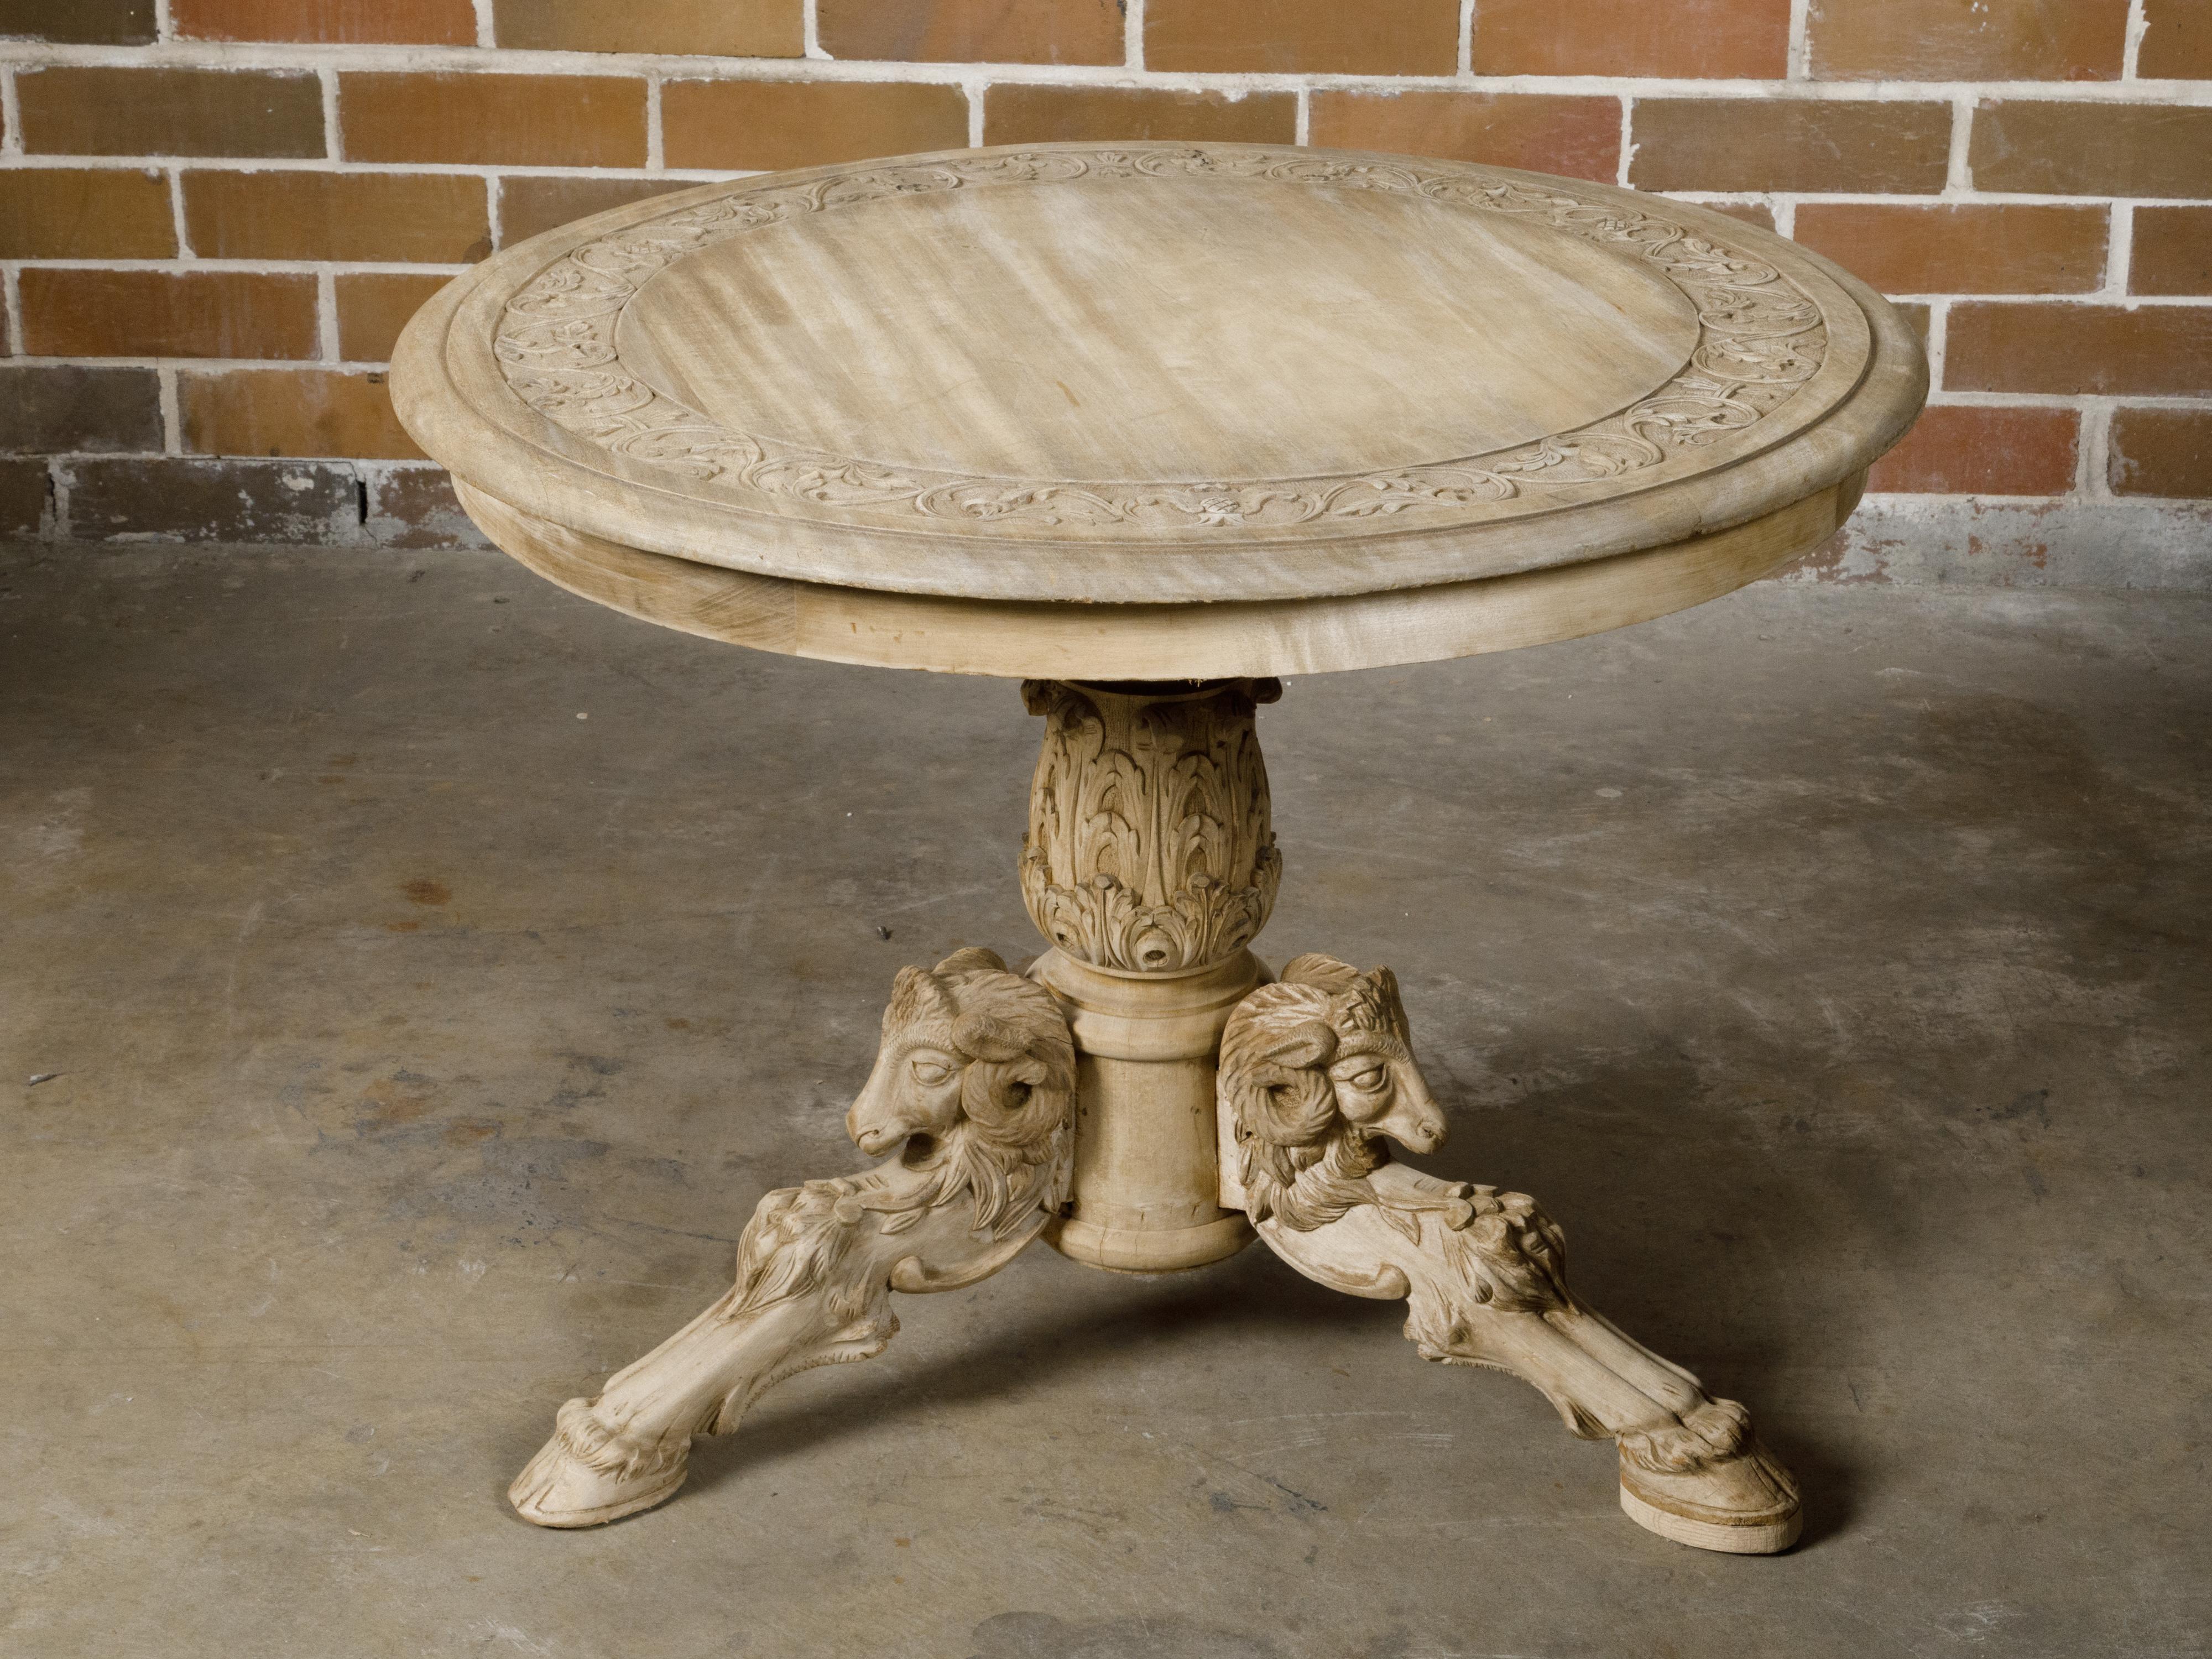 French 1900s Round Top Pedestal Table with Carved Rams' Heads and Scrollwork For Sale 8